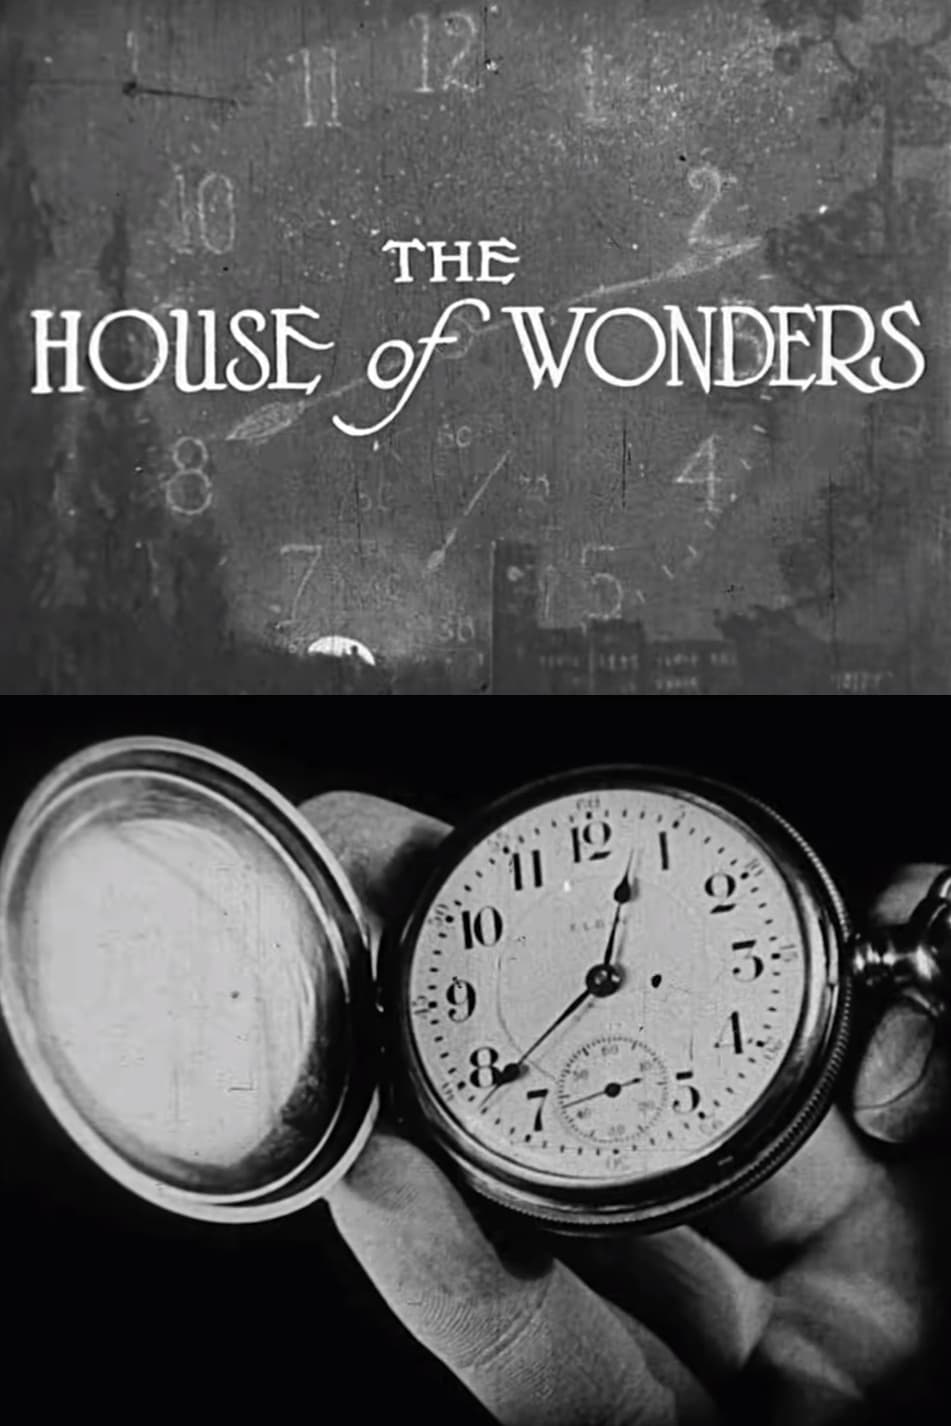 The House of Wonders